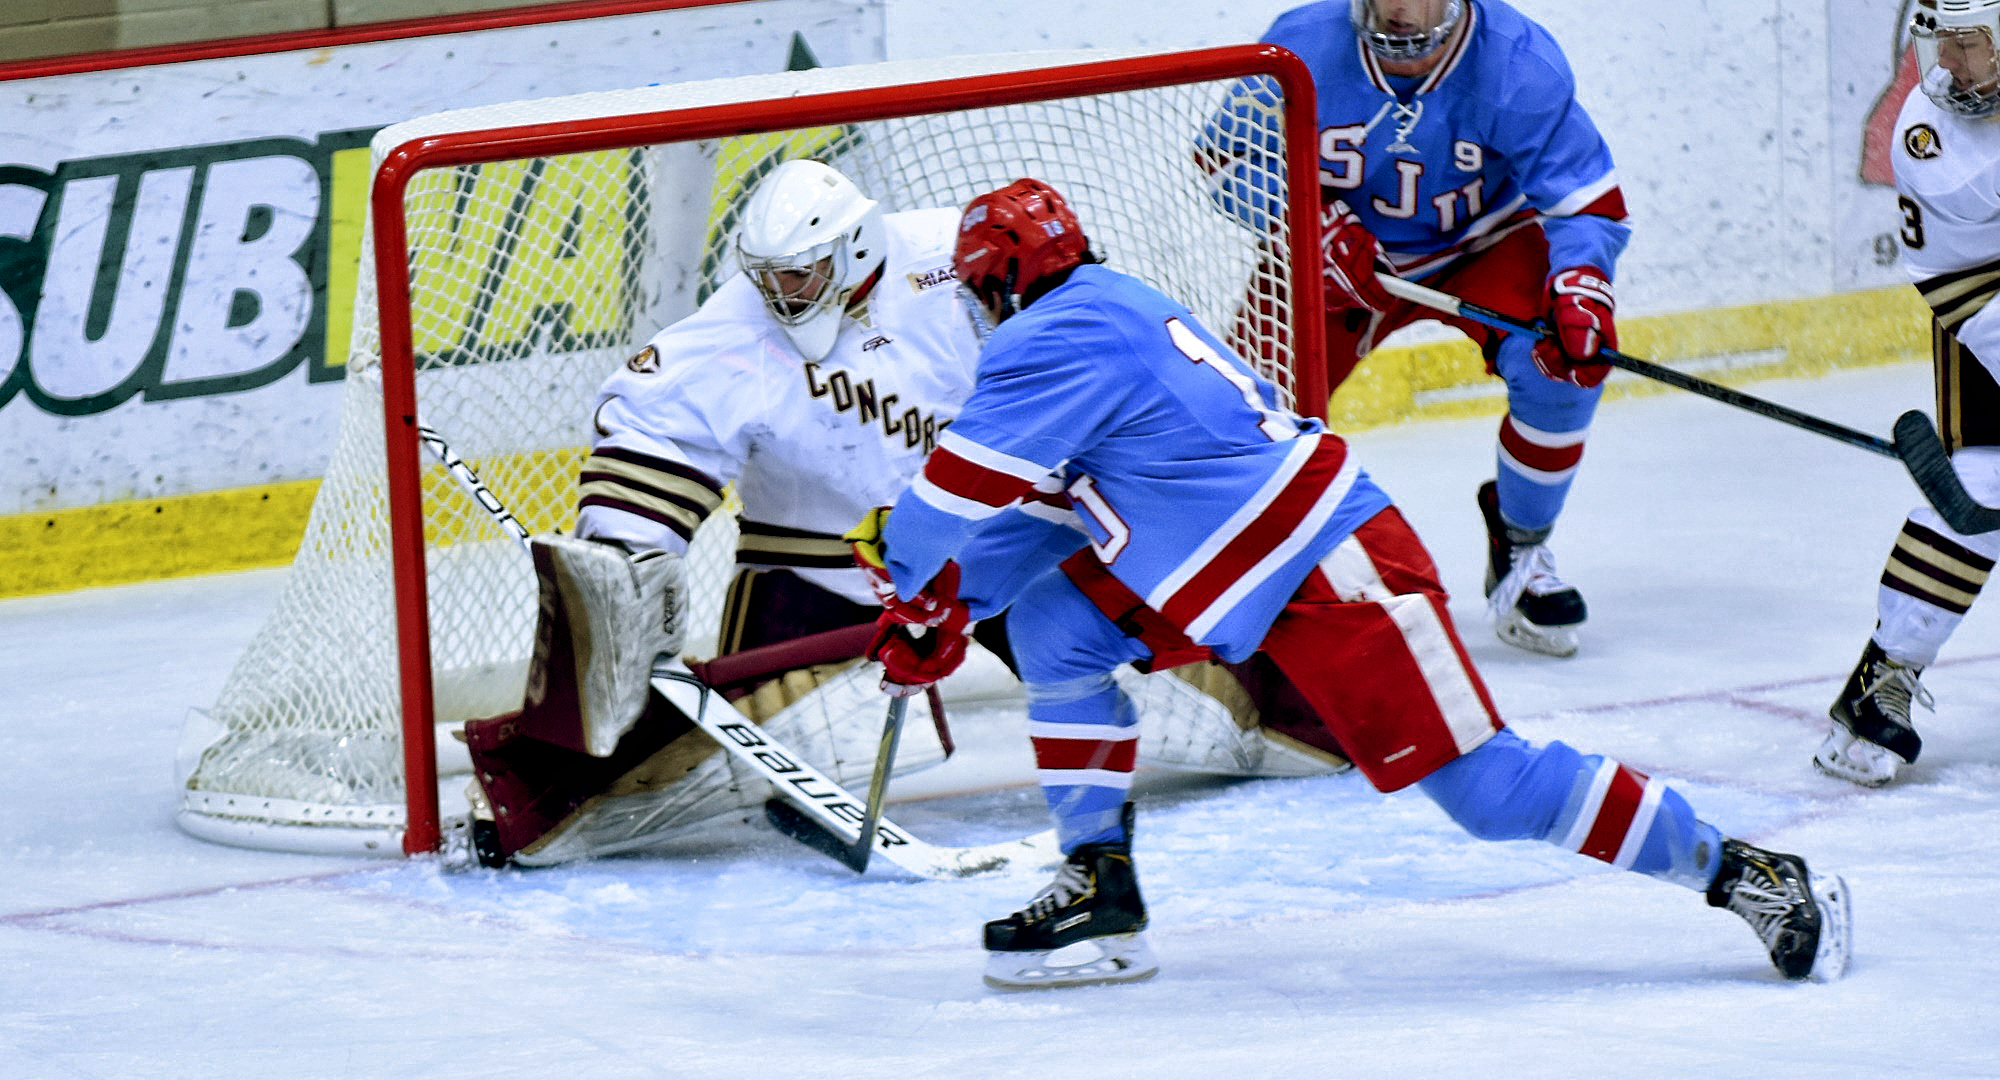 Senior goalie Jacob Stephan made 25 saves and stopped the lone shootout attempt as the Cobbers took five points on the weekend at St. John's. Stephan is unbeaten in his last three games.